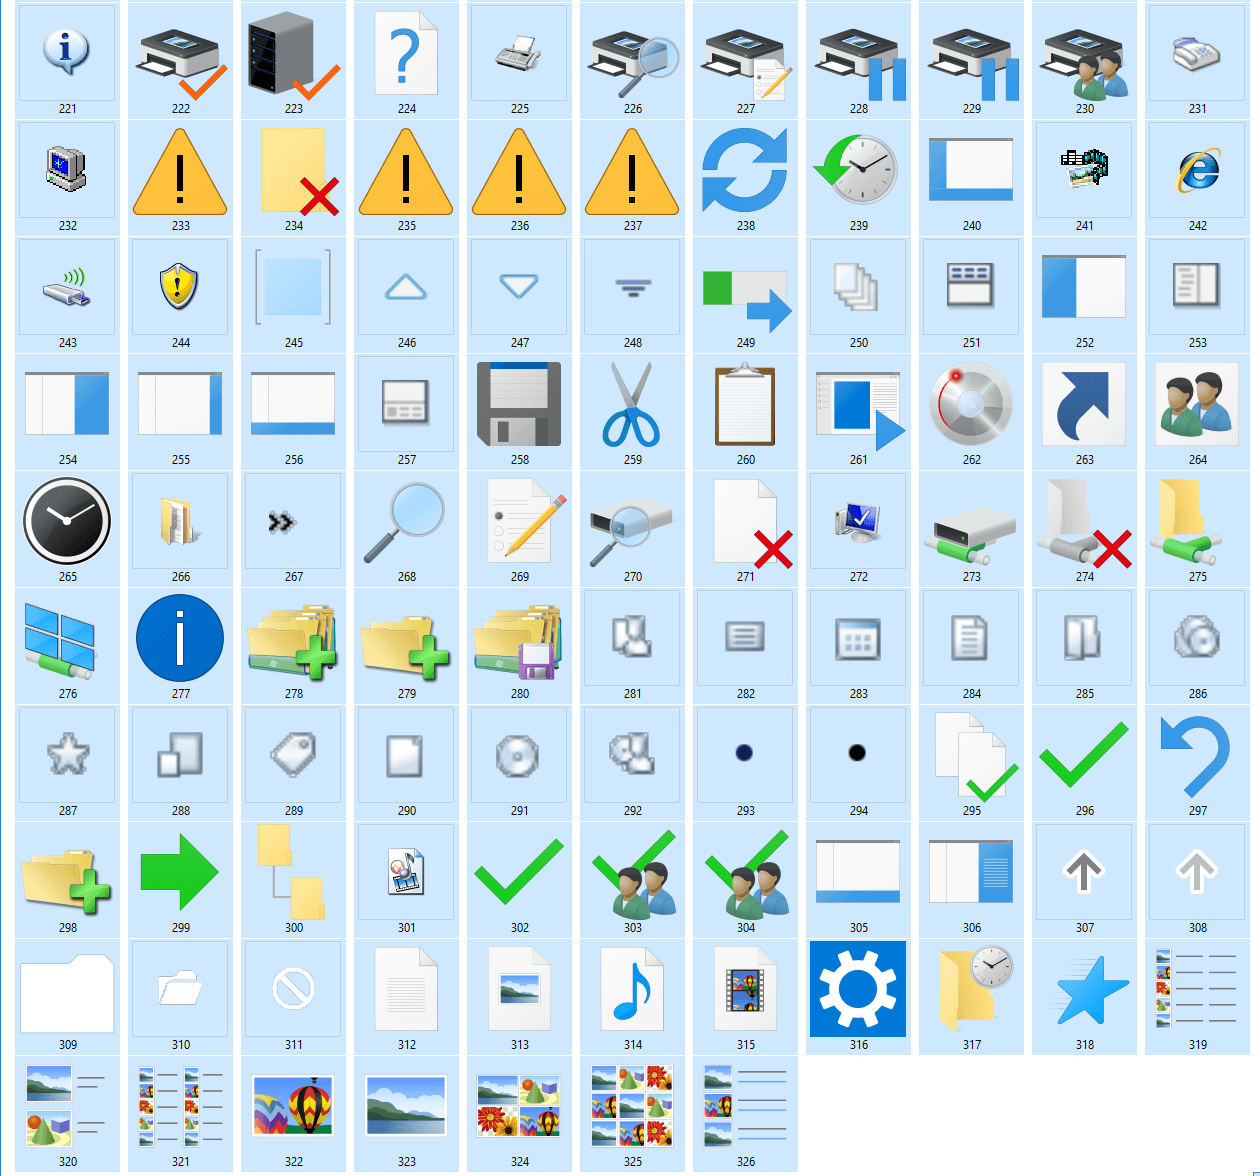 Windows 10 icons of shell32.dll (3/3)